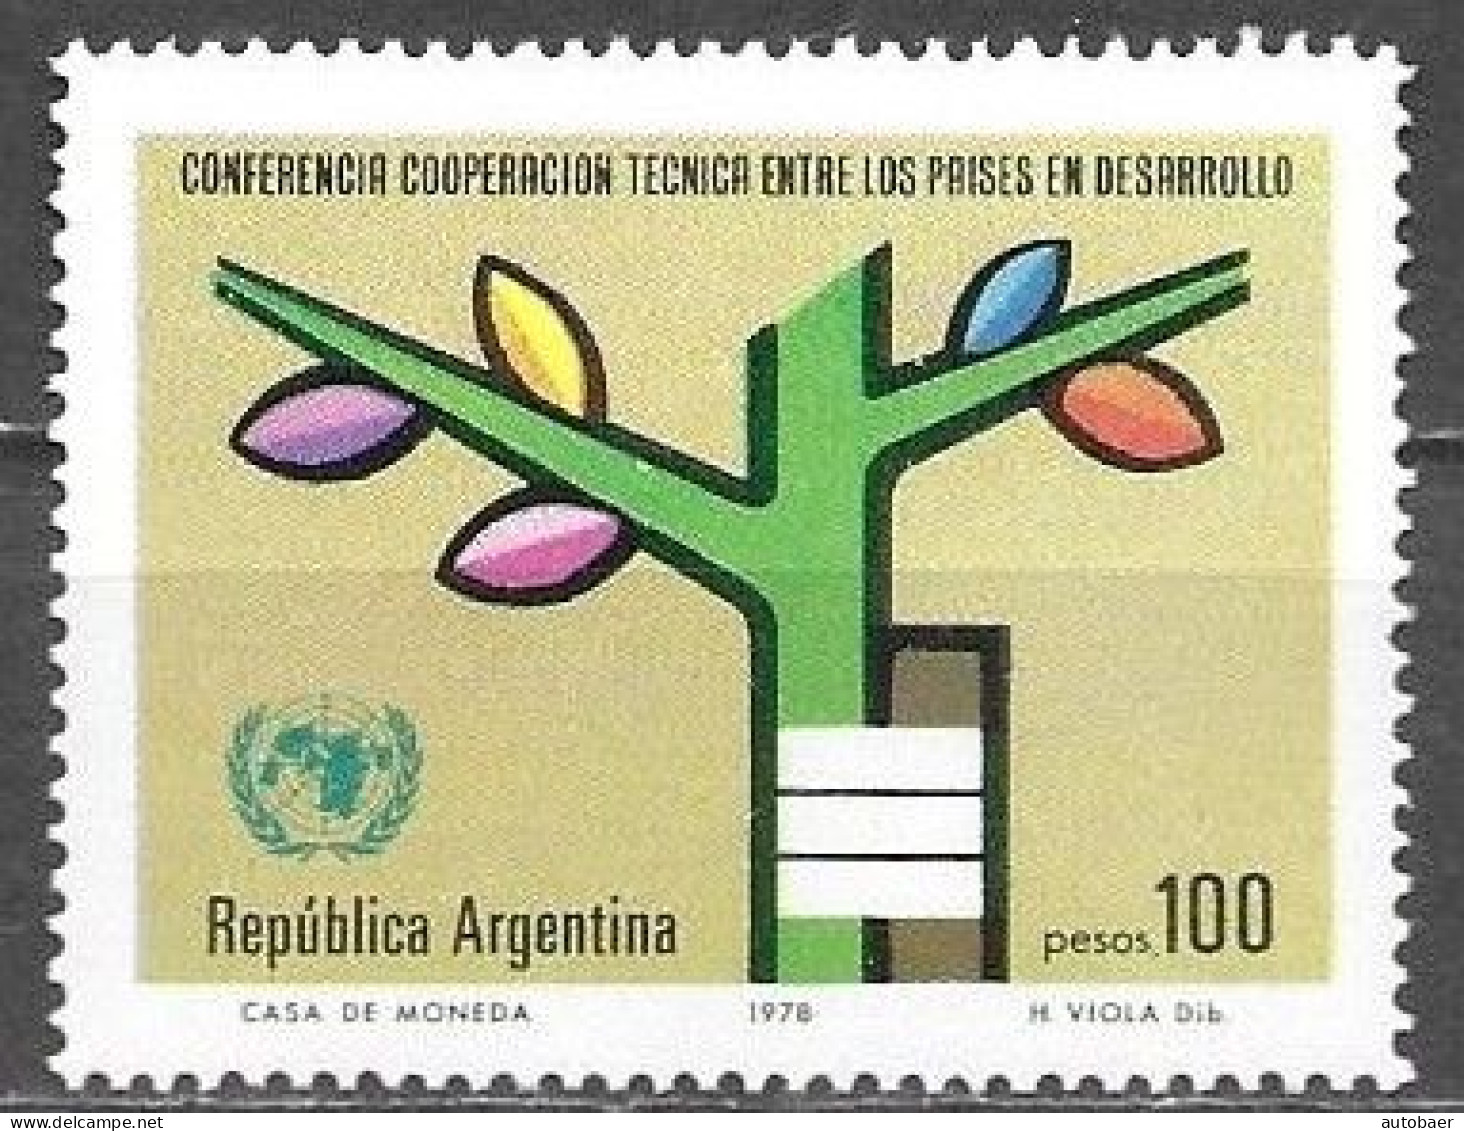 Argentina 1978 Conferencia Cooperacion Conference Cooperation Developing Countries Mi. 1353 MNH Postfrisch Neuf ** - Unused Stamps